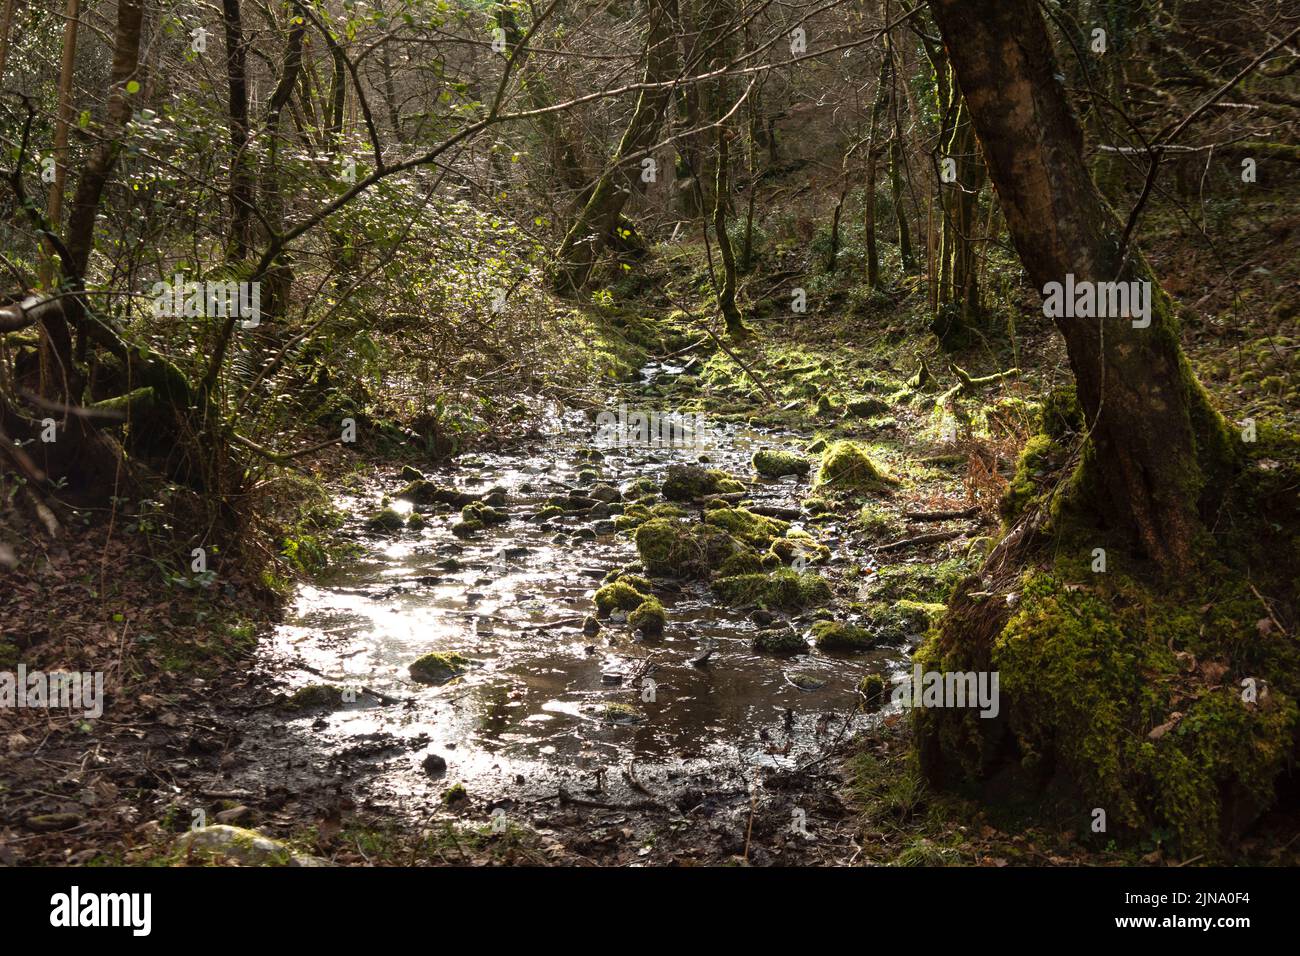 A smal flowing river in  a woodland setting near Exmoor National park, Somerset, UK as it flows towards the sea Stock Photo